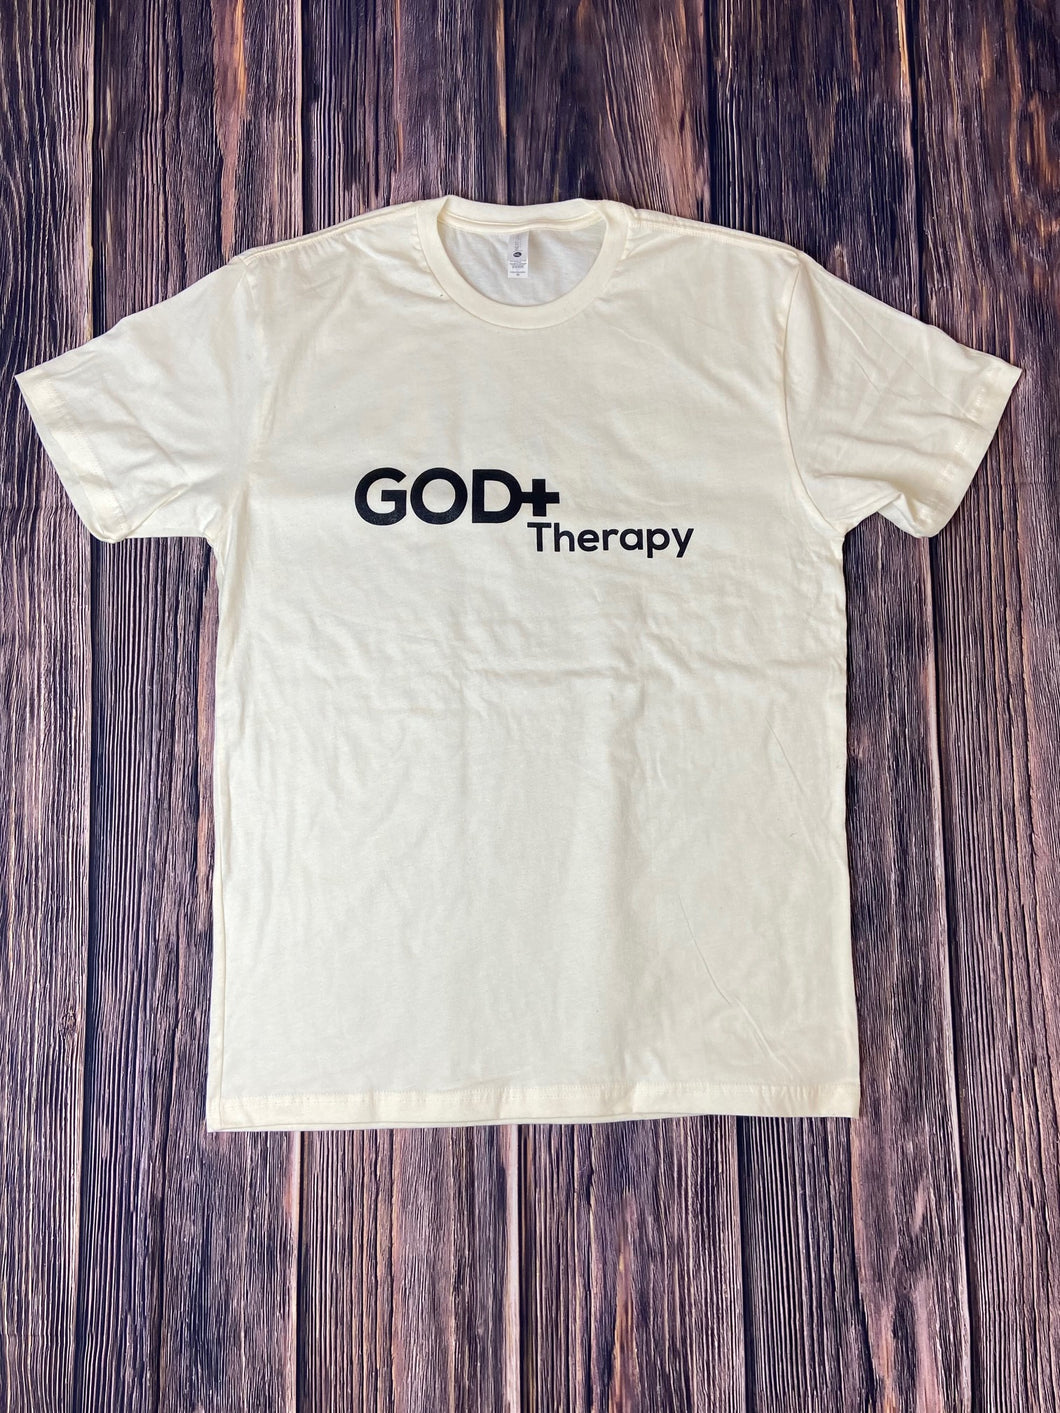 God + Therapy T-shirt